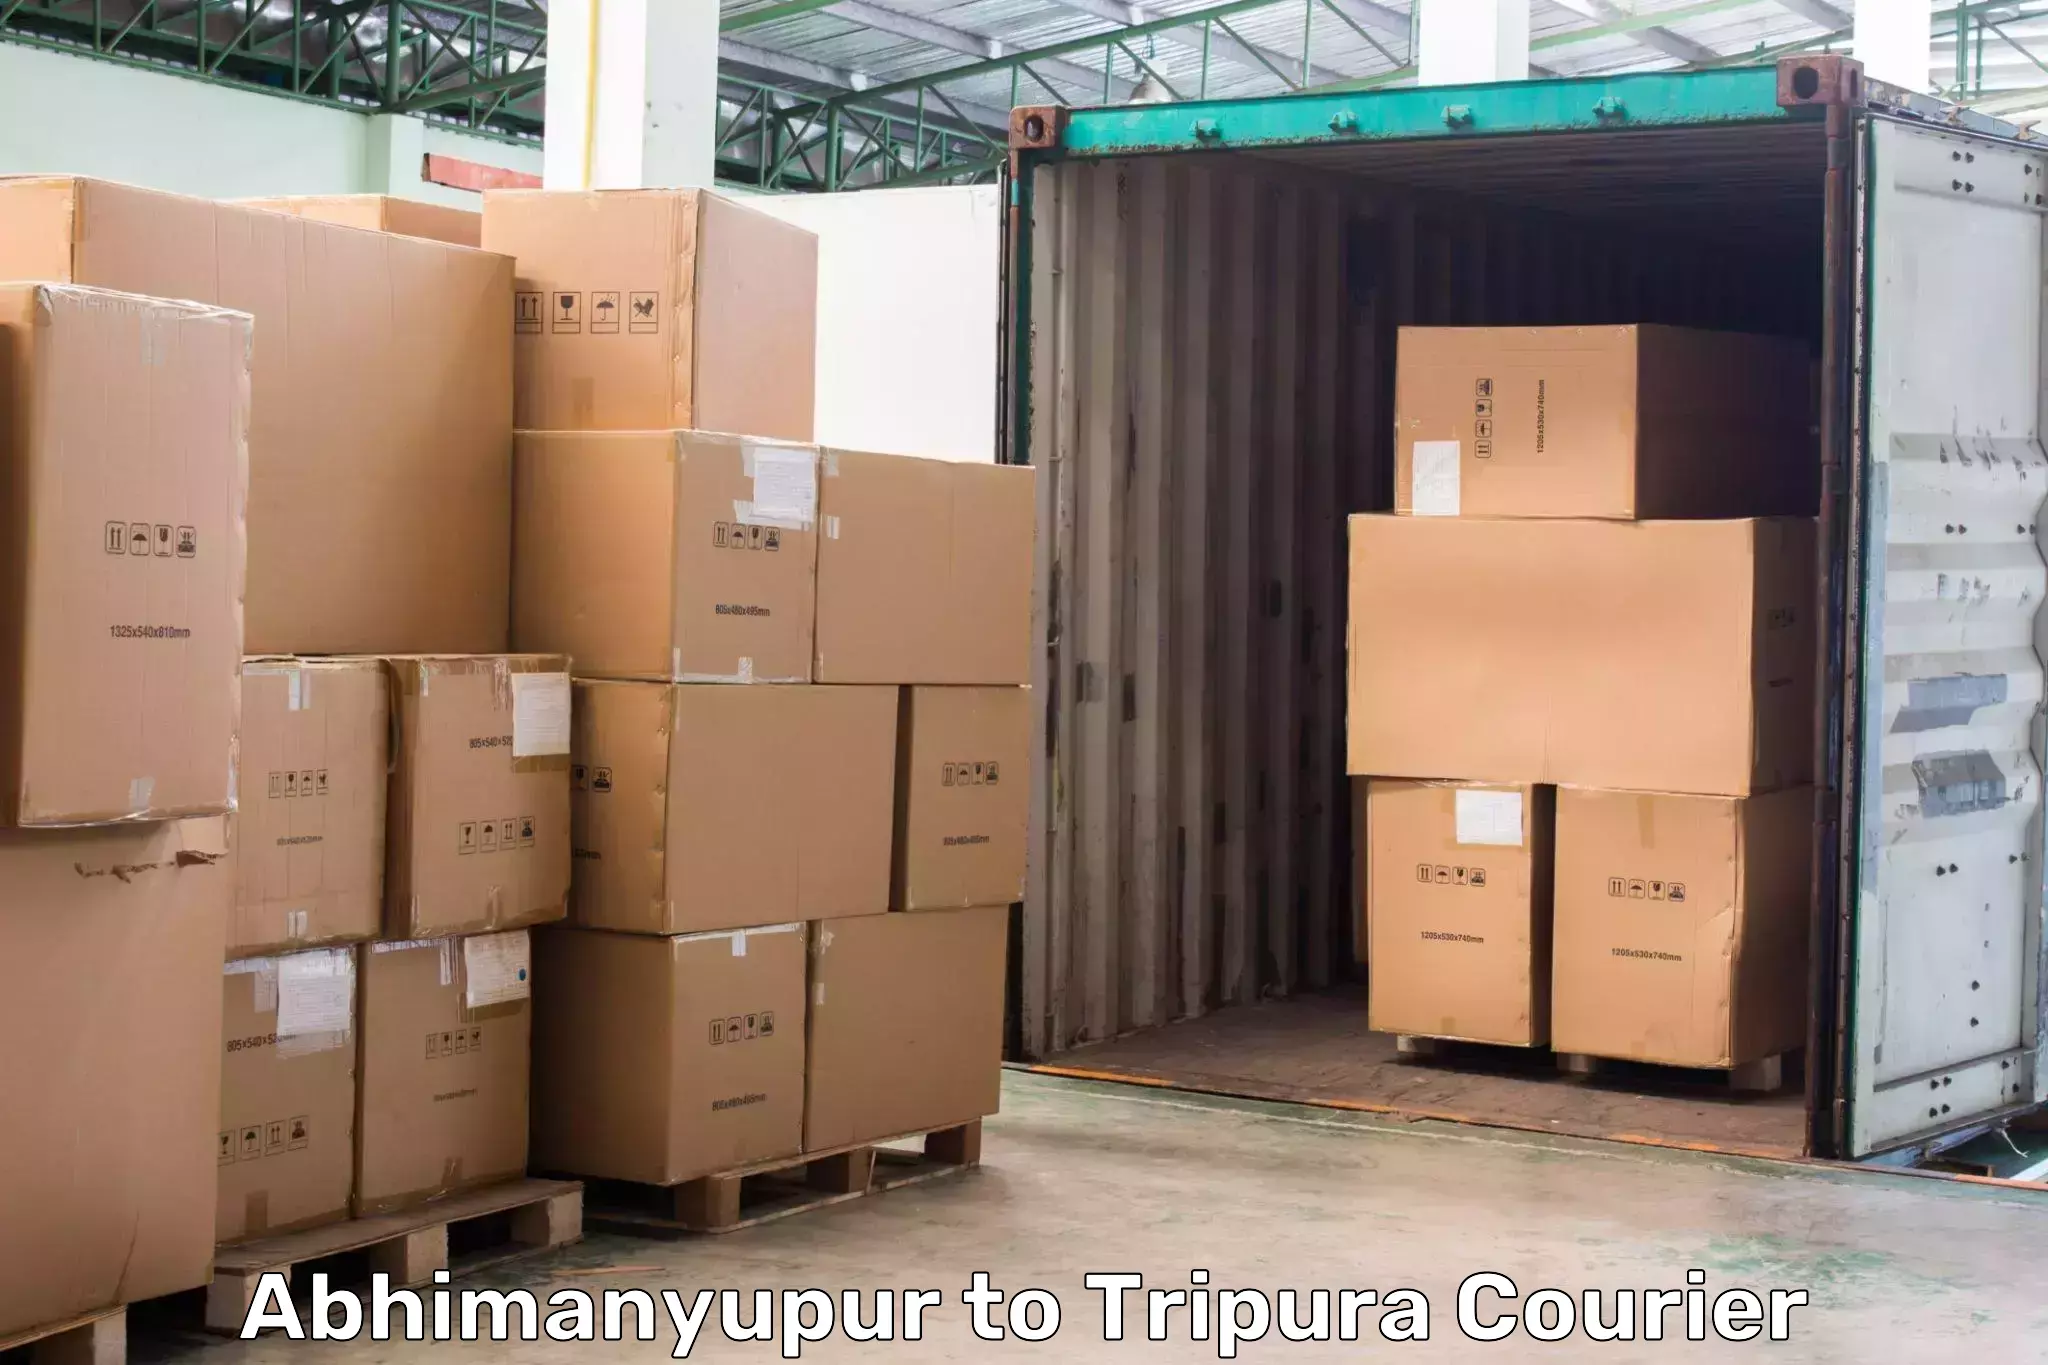 High-speed delivery Abhimanyupur to Aambasa